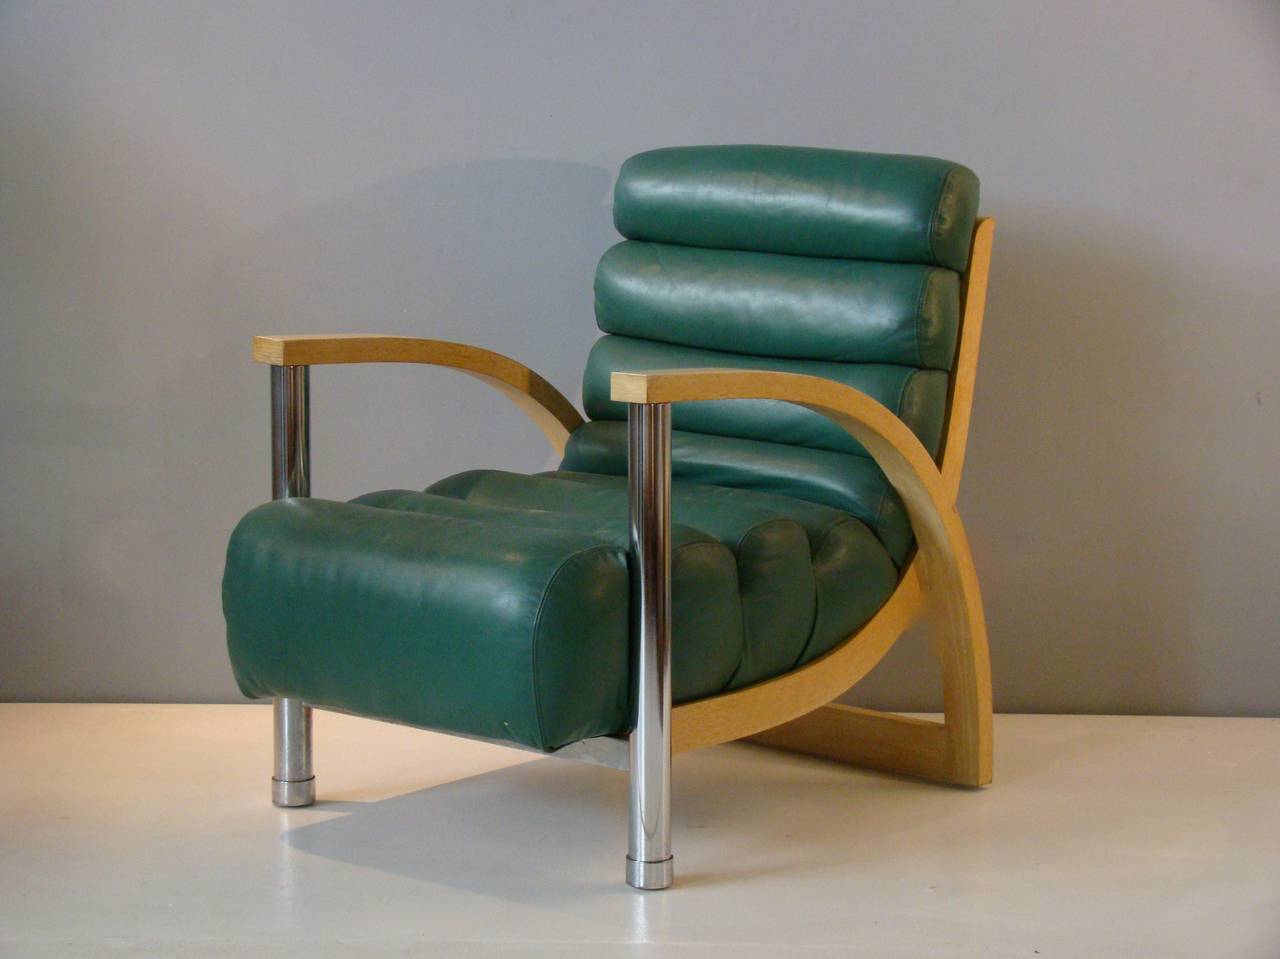 Wonderful stylish and sculptural pair of Jay Spectre lounge chairs in leather, cerused oak and chrome.  Not only is this chair impressive to look at, it is also incredibly comfortable.  Will be the focal point in any room.